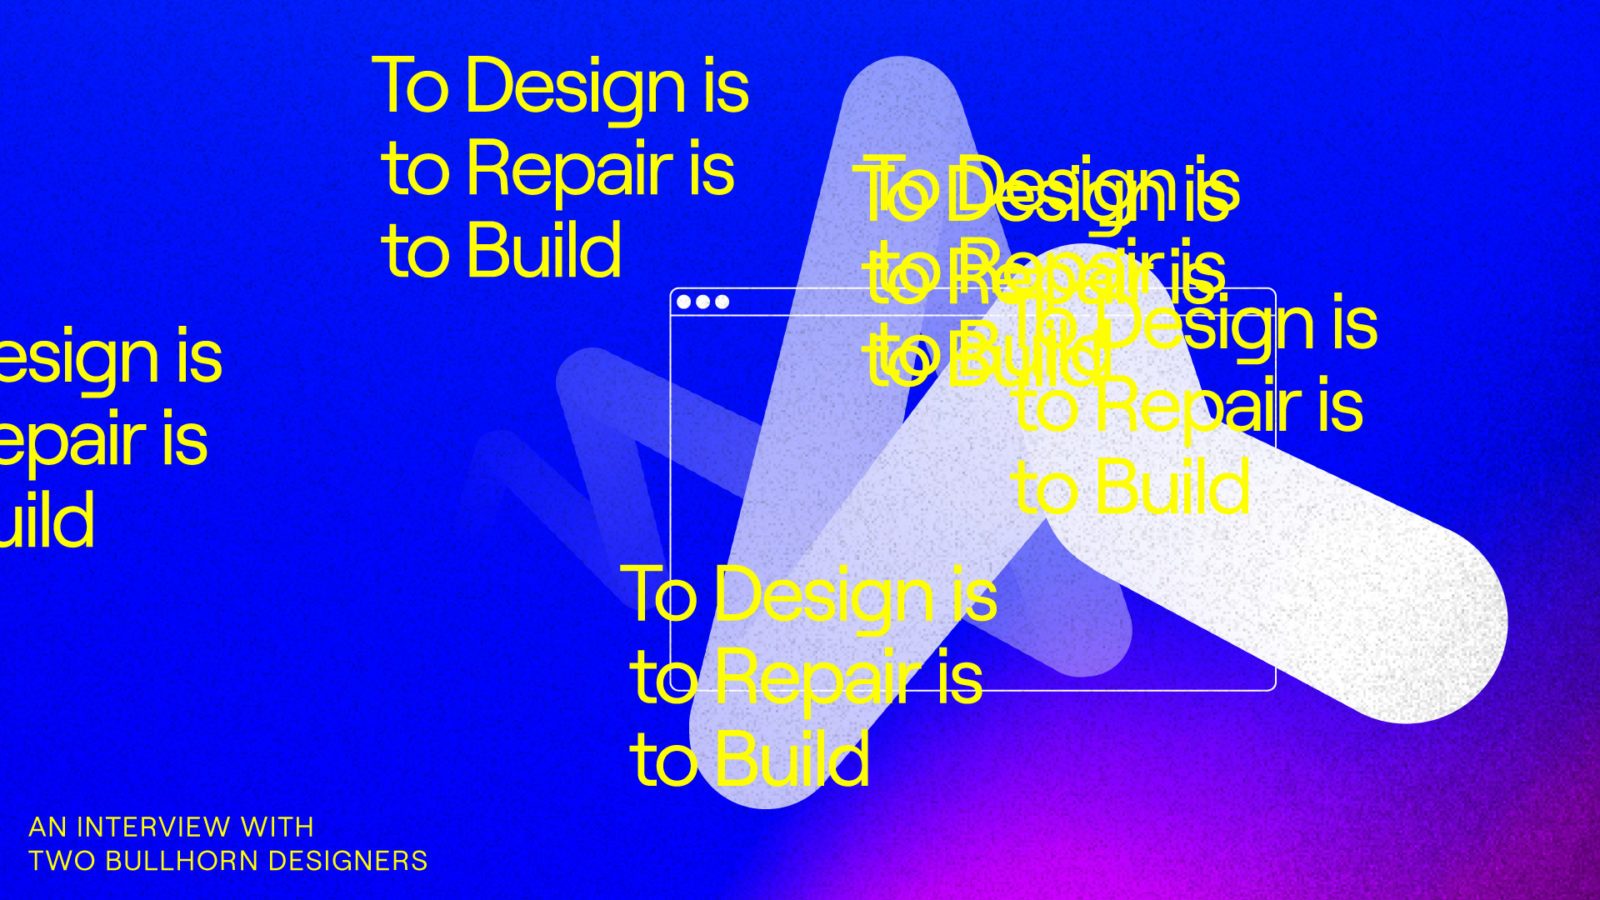 To Design is to Repair is to Build